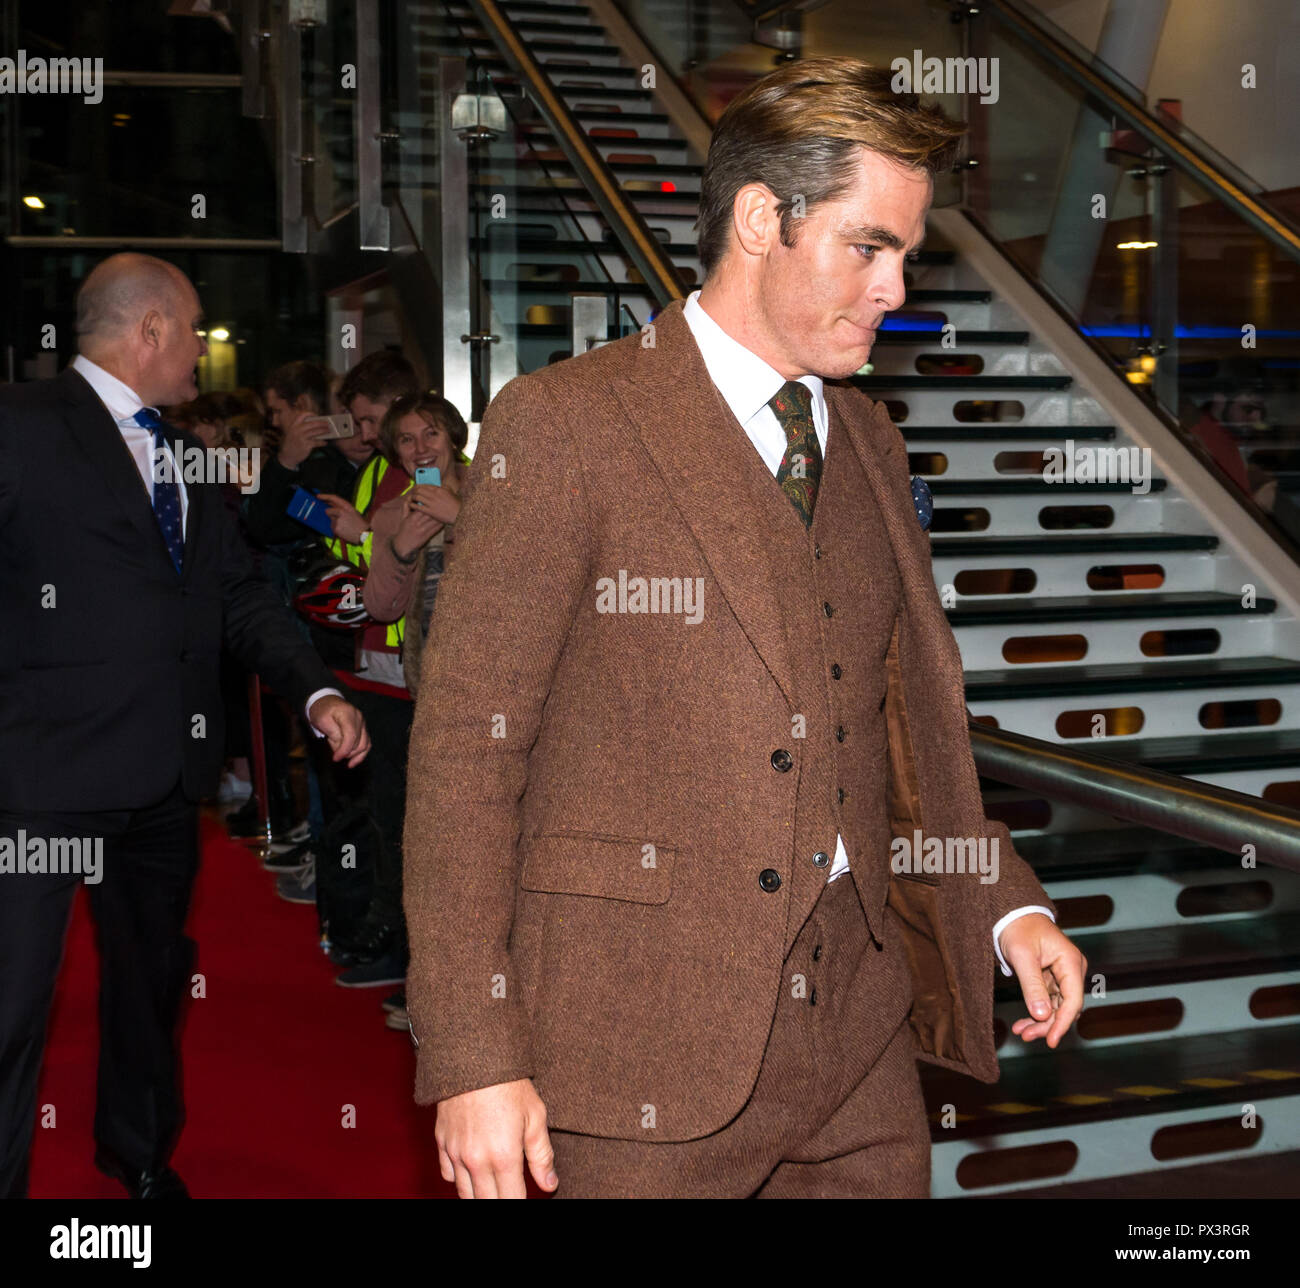 Vue Omni, Leith Walk, Edinburgh, Scotland, United Kingdom, 19th October 2018. Stars attend the Scottish premiere of Netflix Outlaw King. The red carpet is laid out the for the cast and team producing Netflix’s latest blockbuster film. The film stars Chris Pine as Robert the Bruce. Chris Pine arrives Stock Photo